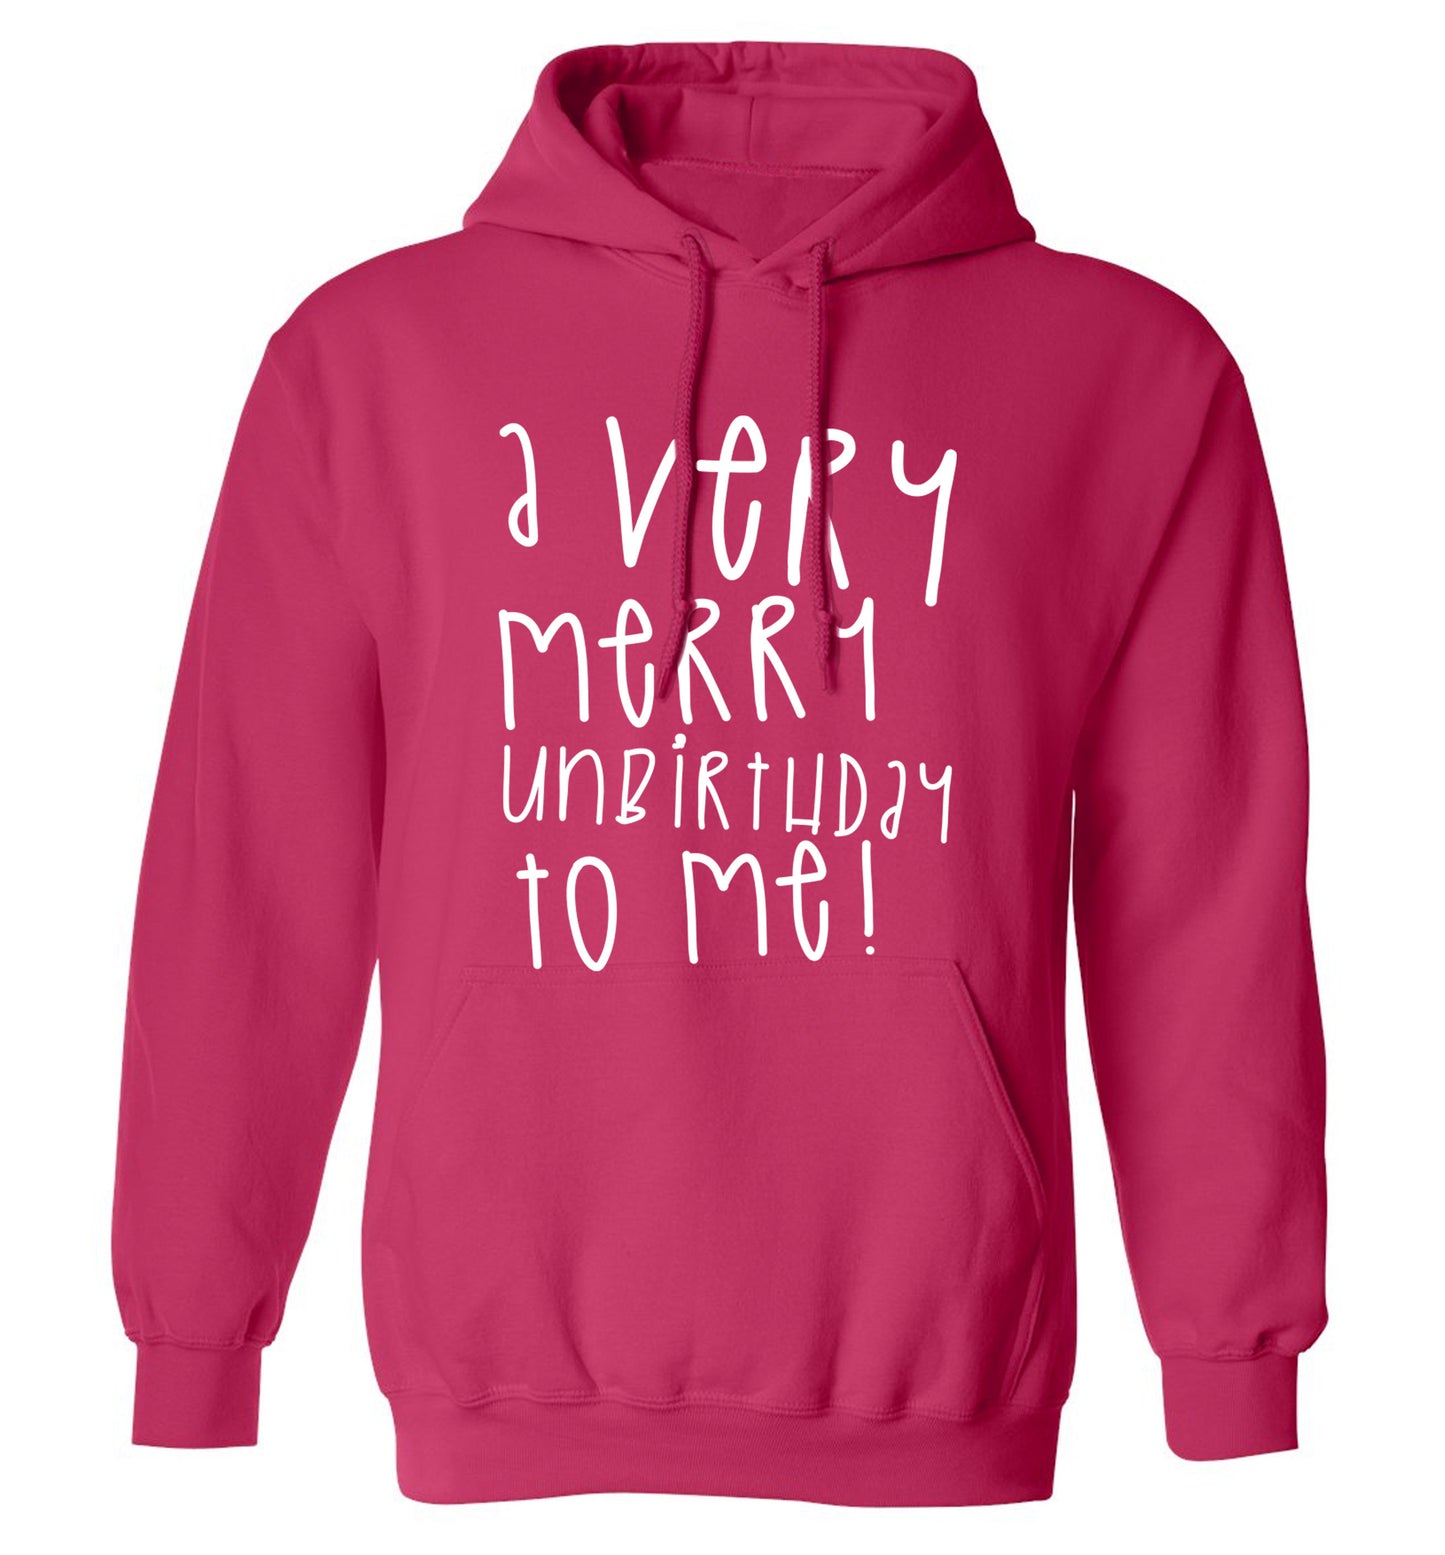 A very merry unbirthday to me! adults unisex pink hoodie 2XL